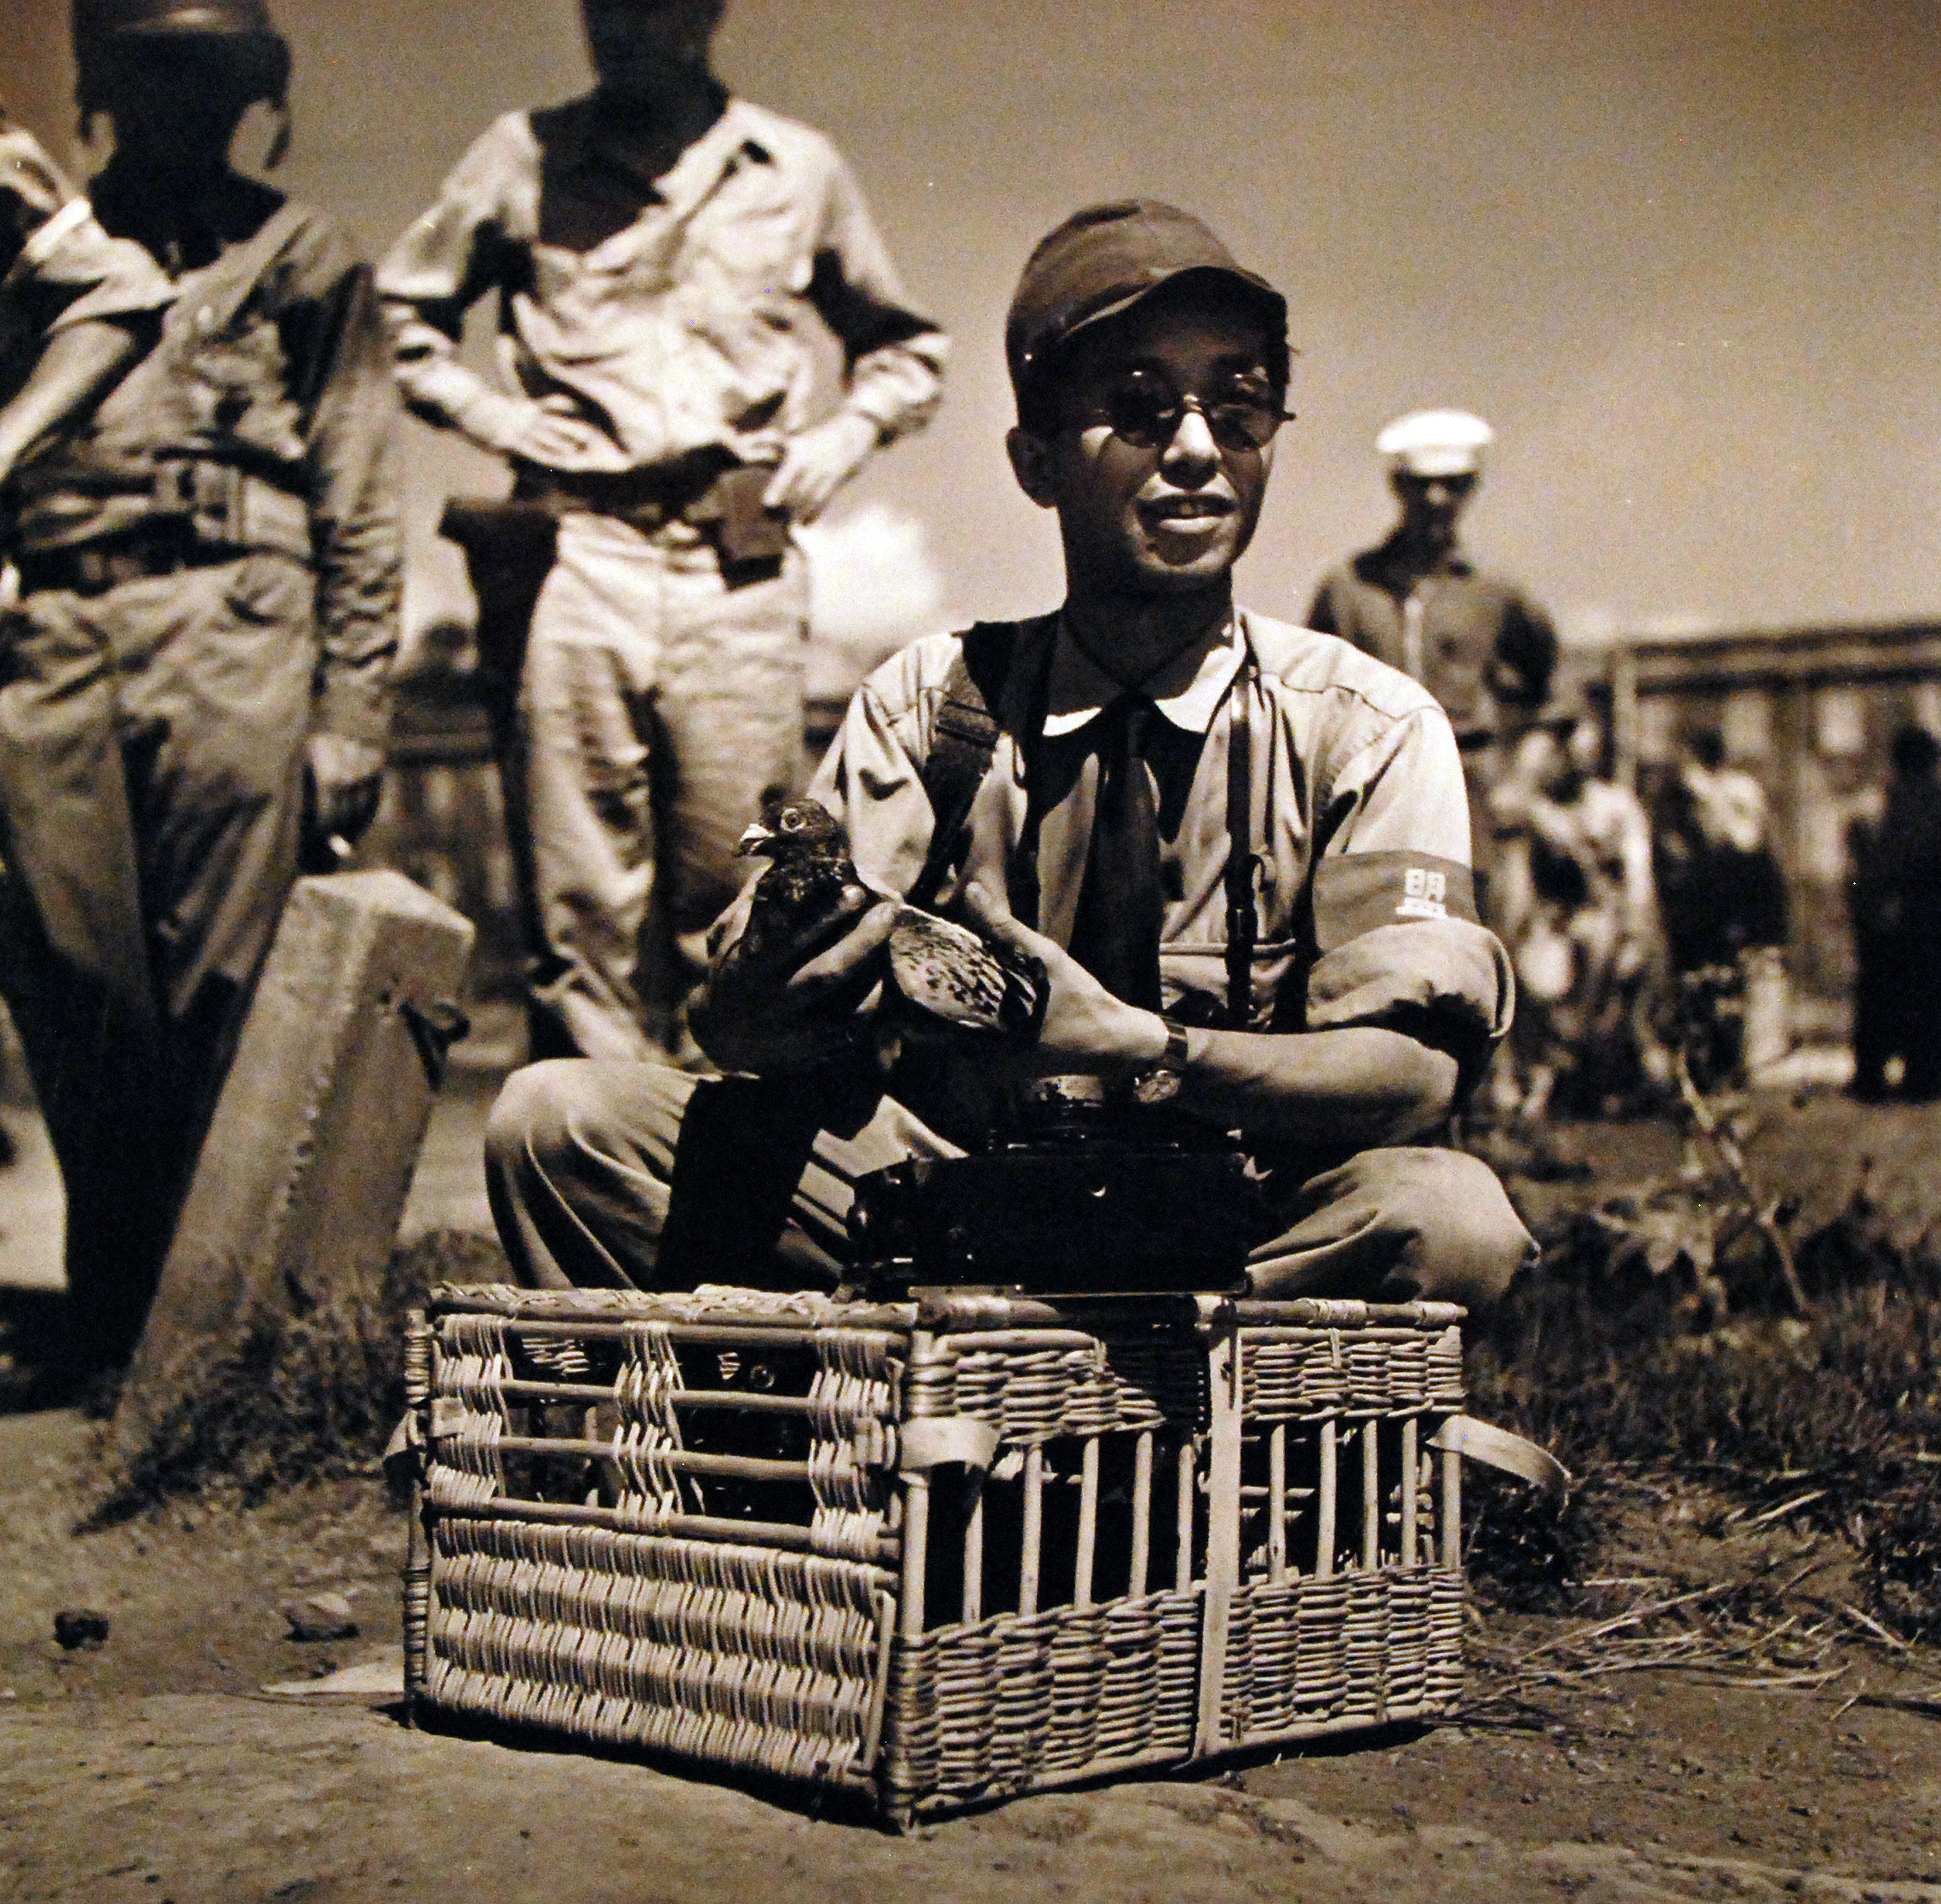 Japanese photographer T. Iwamoto attaching film of surrender of Yokosuka Navy Base to a pigeon for transport to Domeo News Agency in Tokyo, Japan, Aug 1945